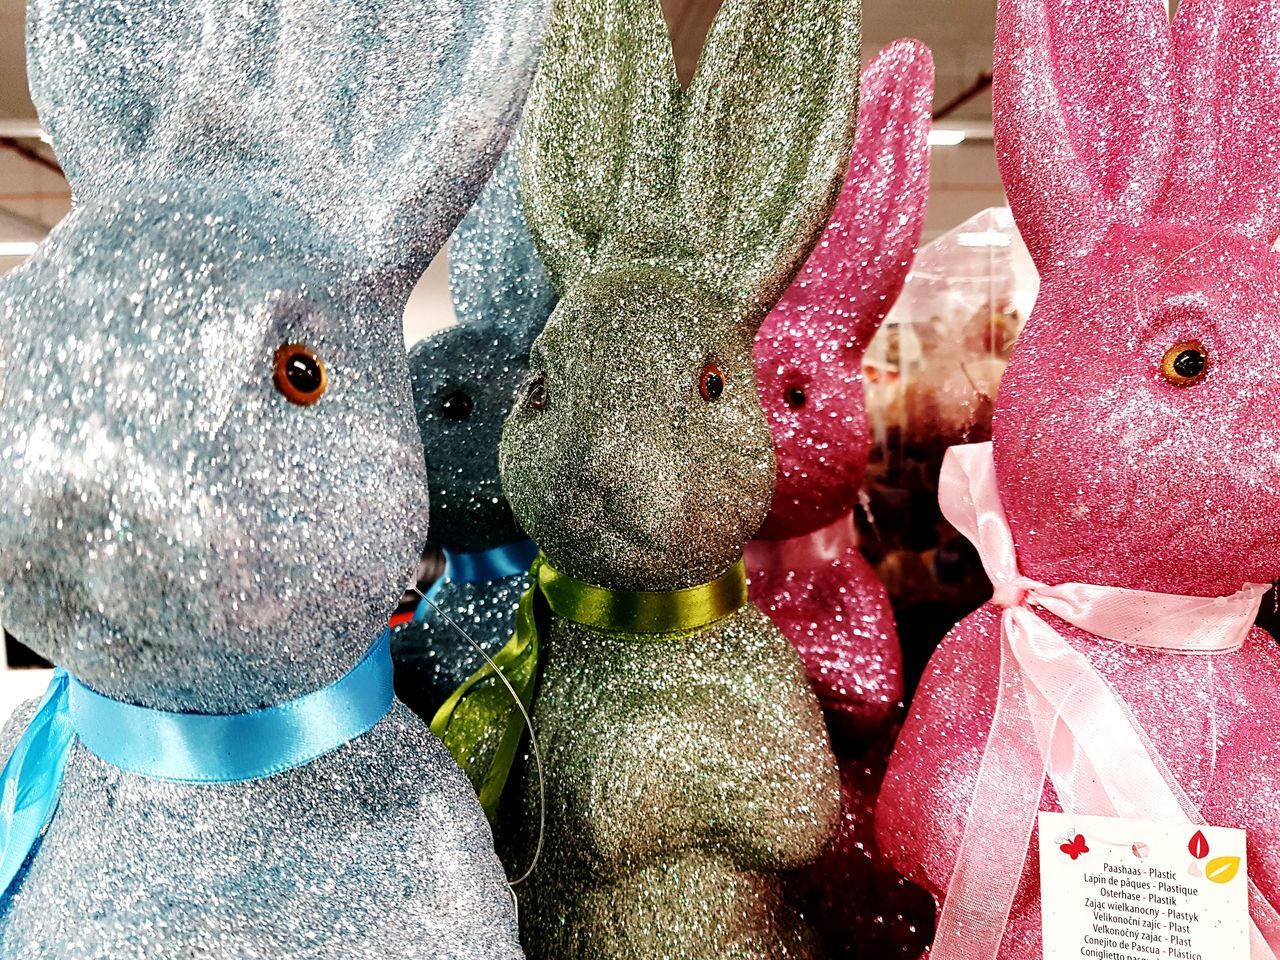 CLOSE-UP OF TOYS FOR SALE IN MARKET STALL